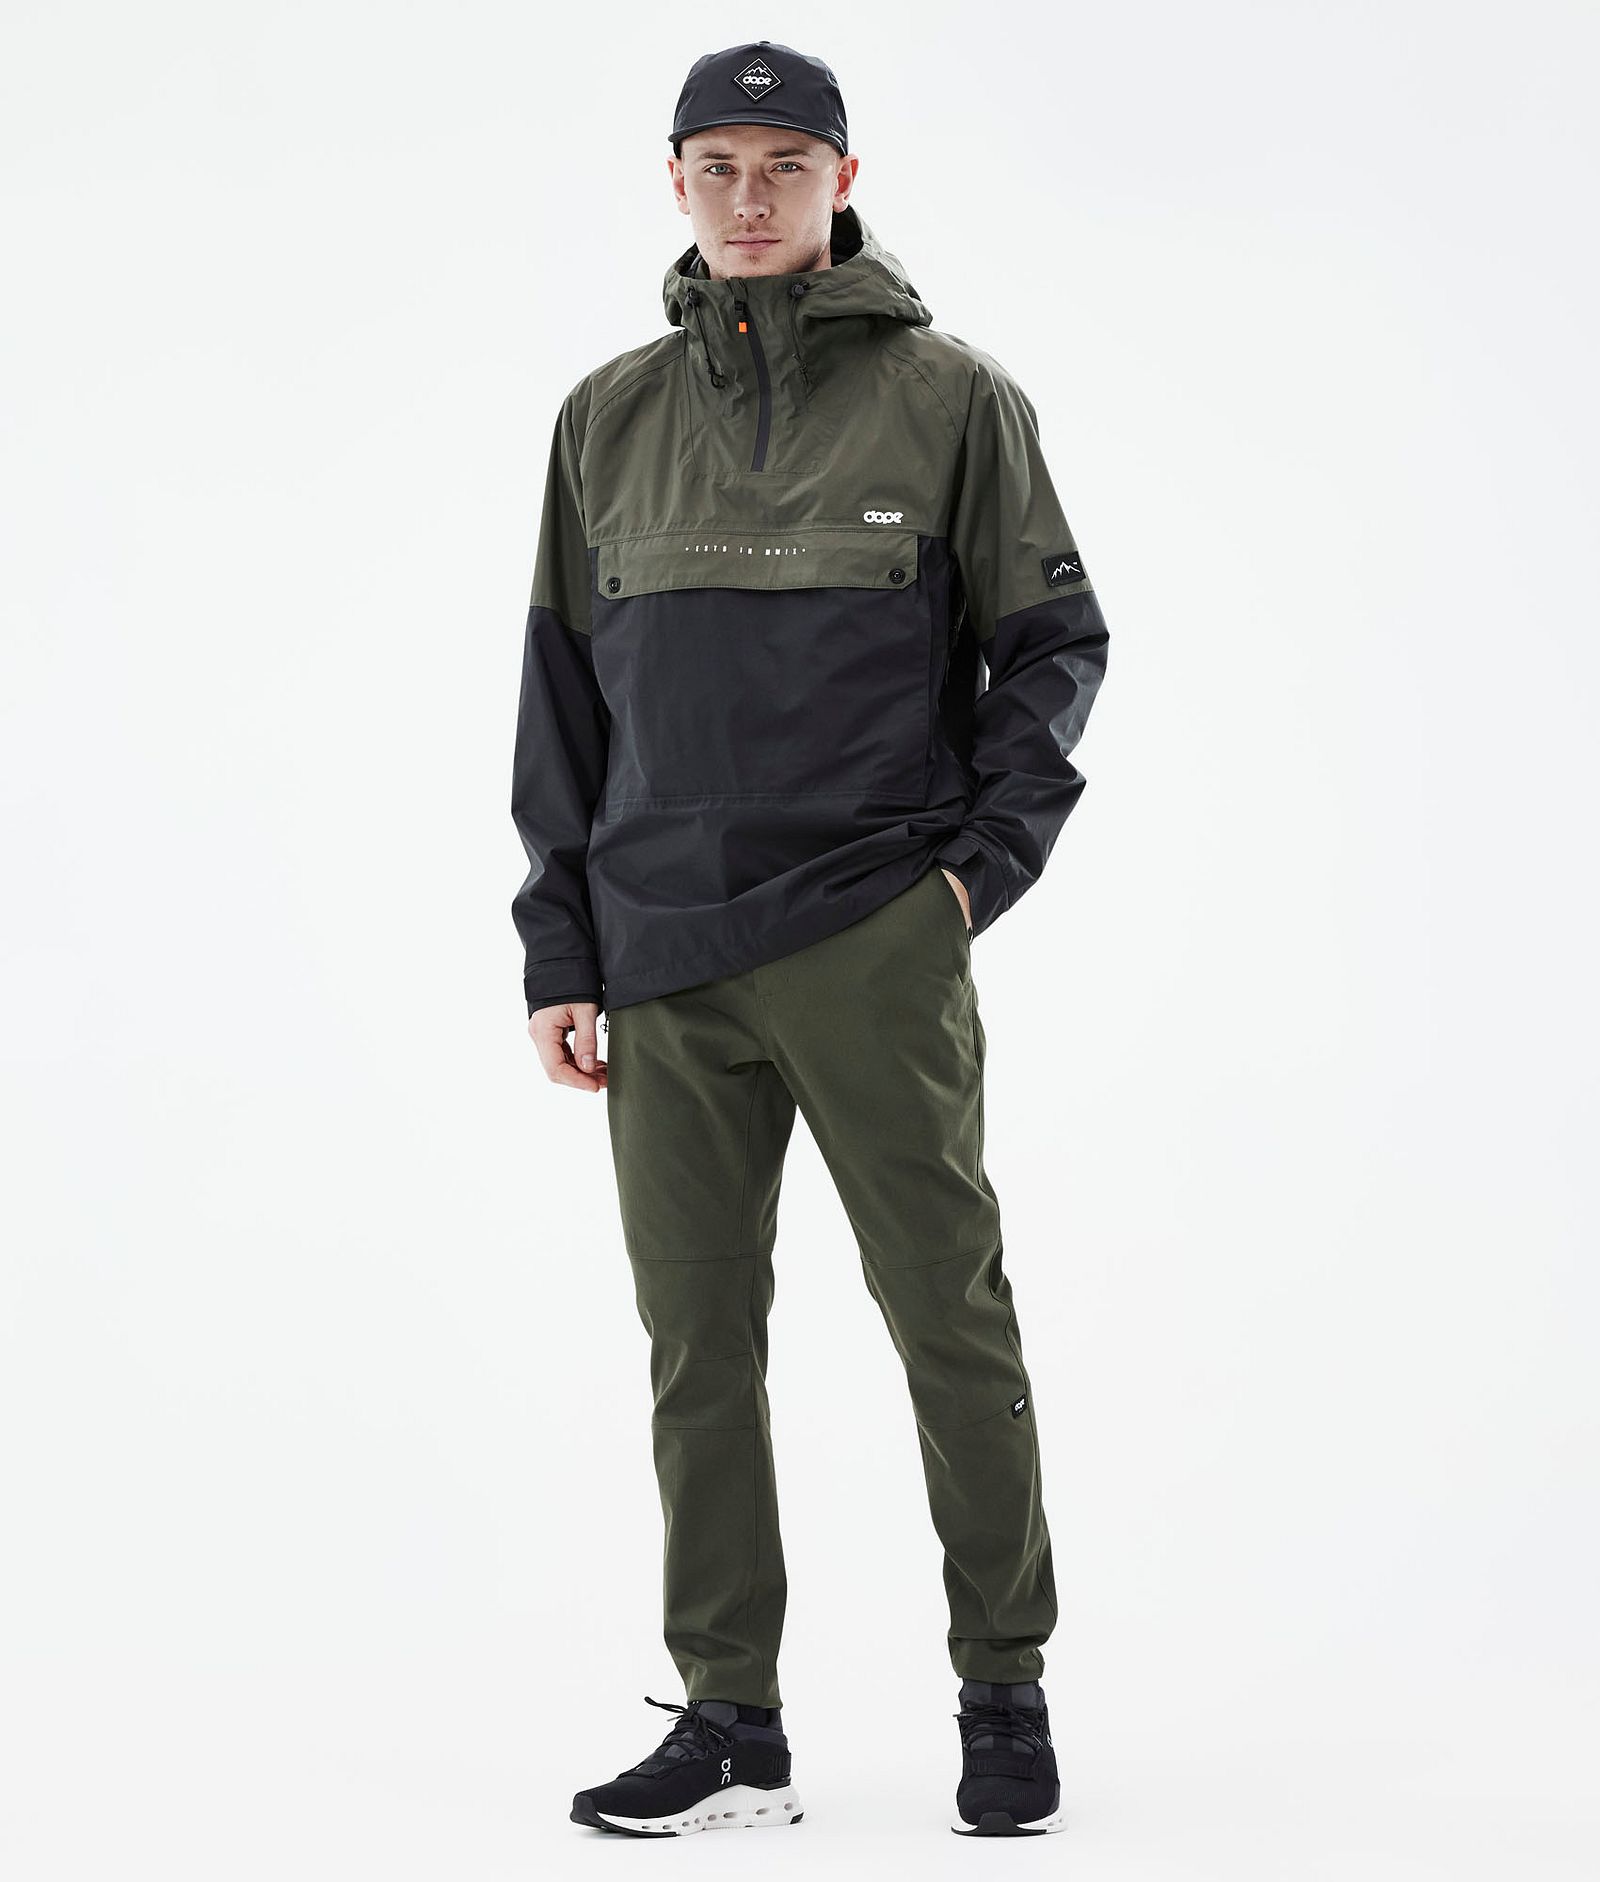 Dope Rover Tech Pantalones Outdoor Hombre Olive Green